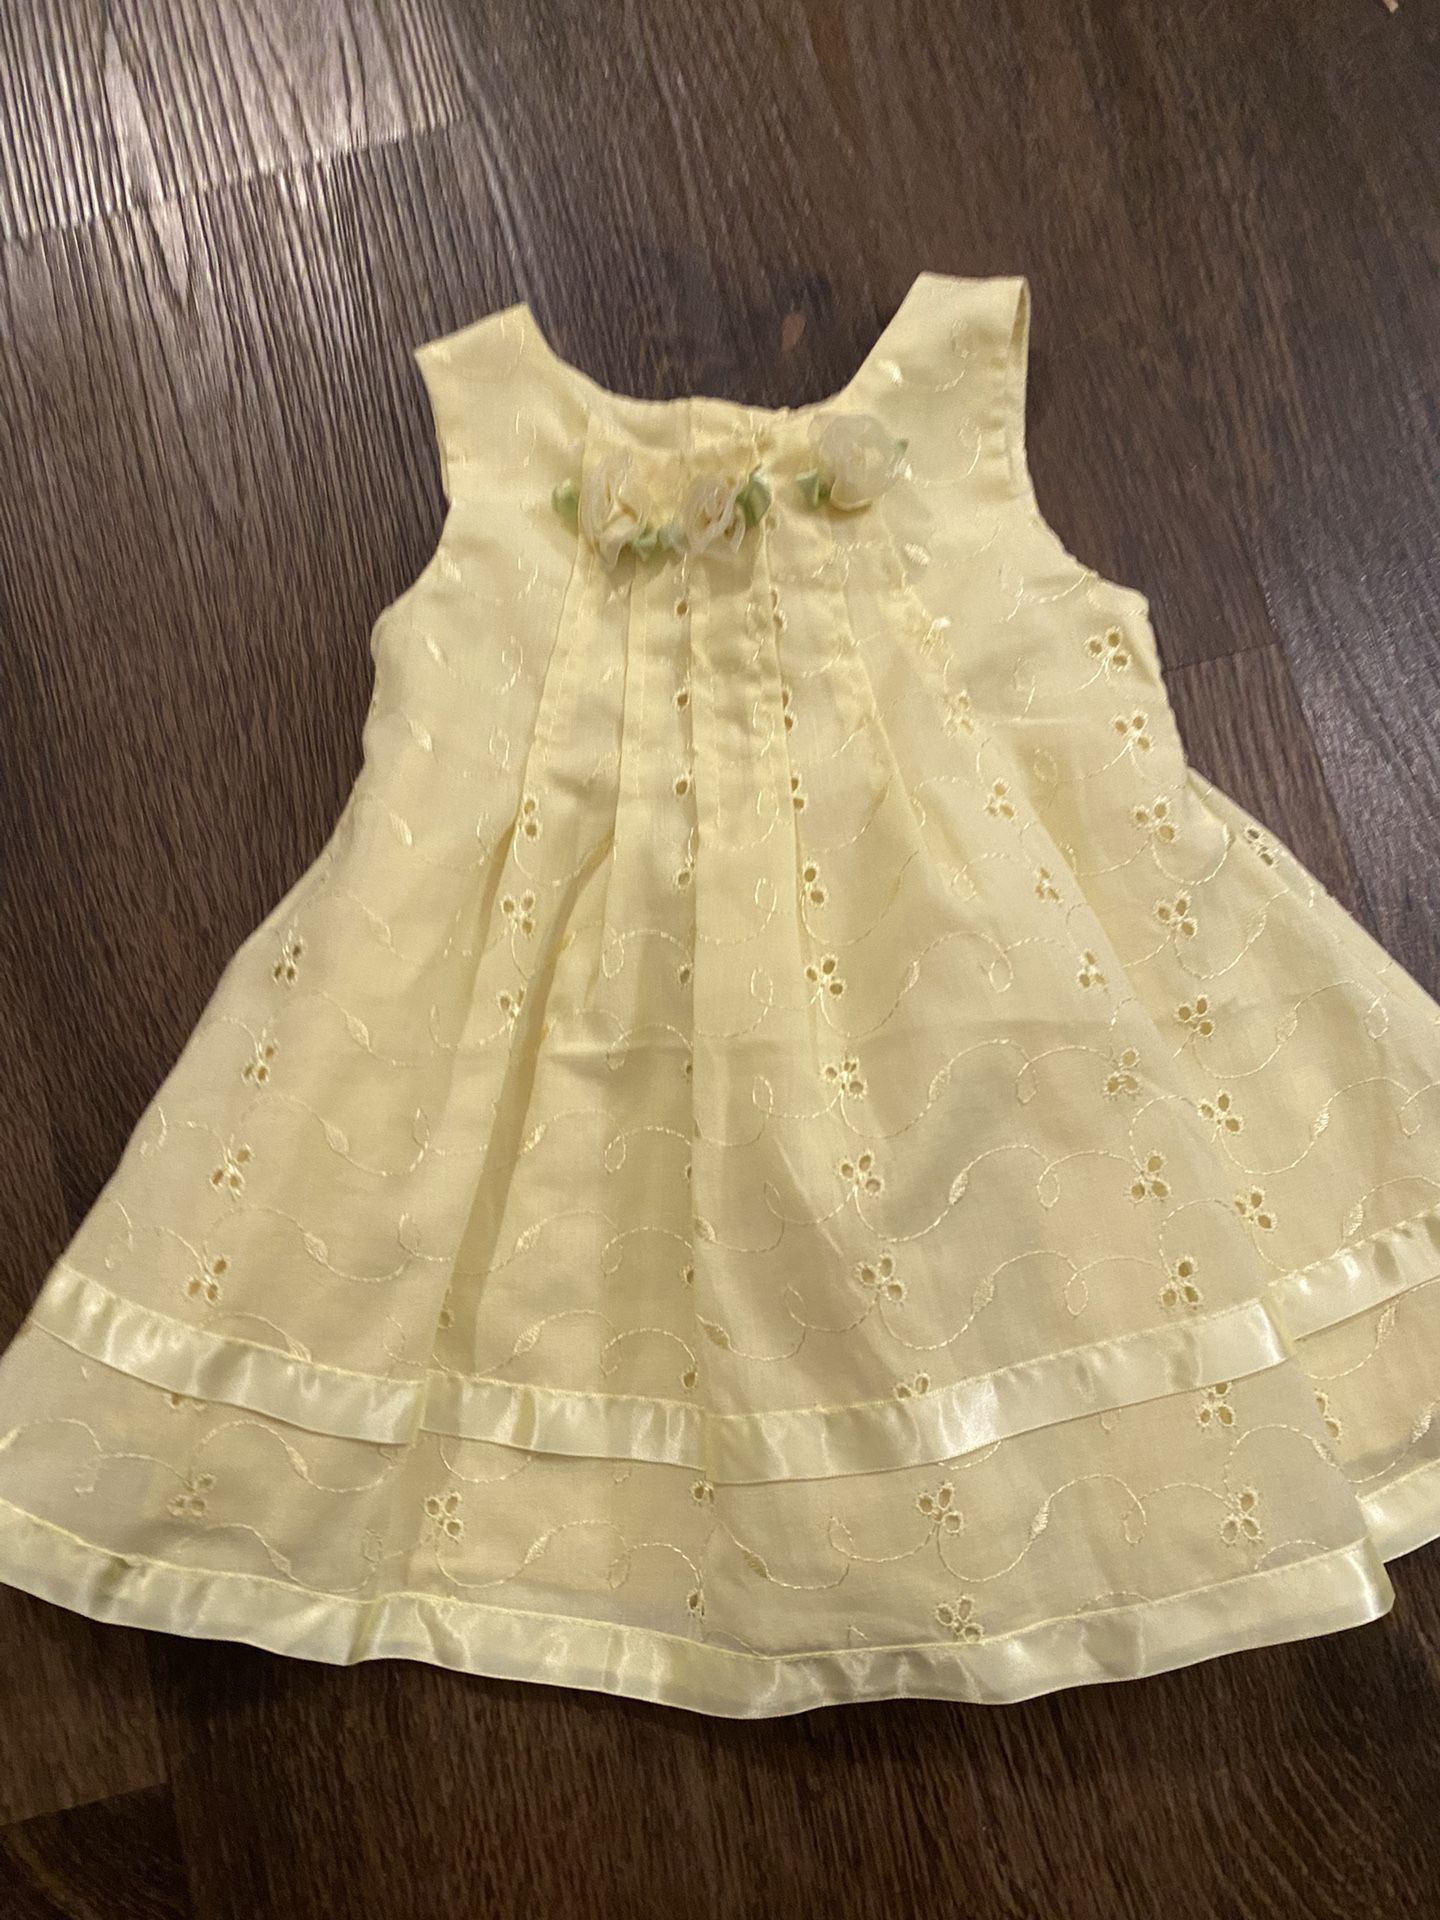 Girls Yellow Dress Size 12 Months By Jenny And Me #2